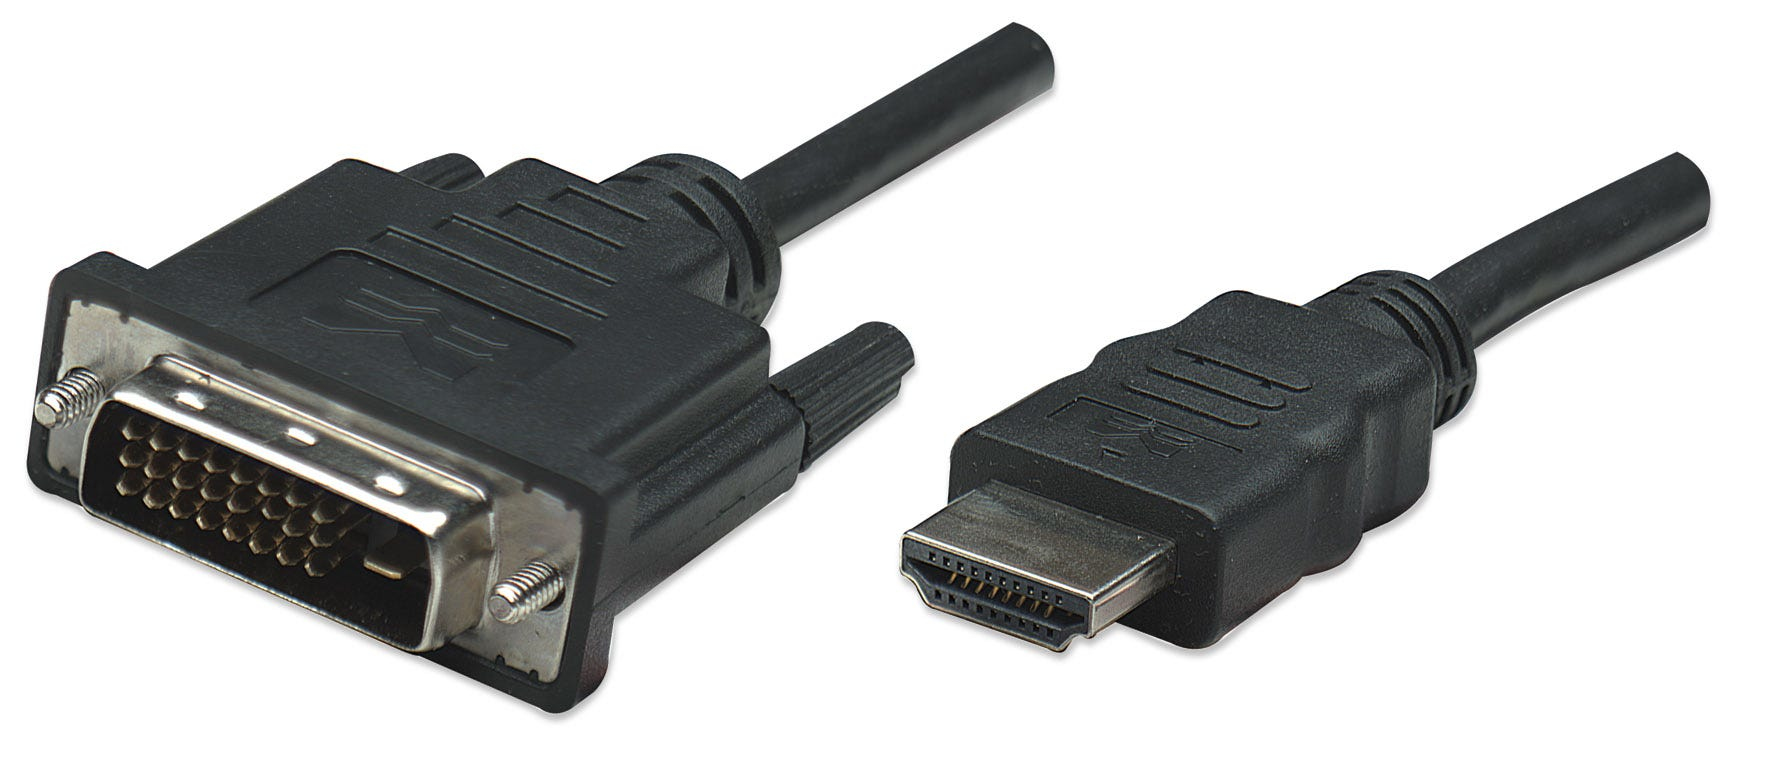 Photos - Cable (video, audio, USB) MANHATTAN HDMI to DVI-D 24+1 Cable, 1m, Male to Male, Black, Equivalen 322 